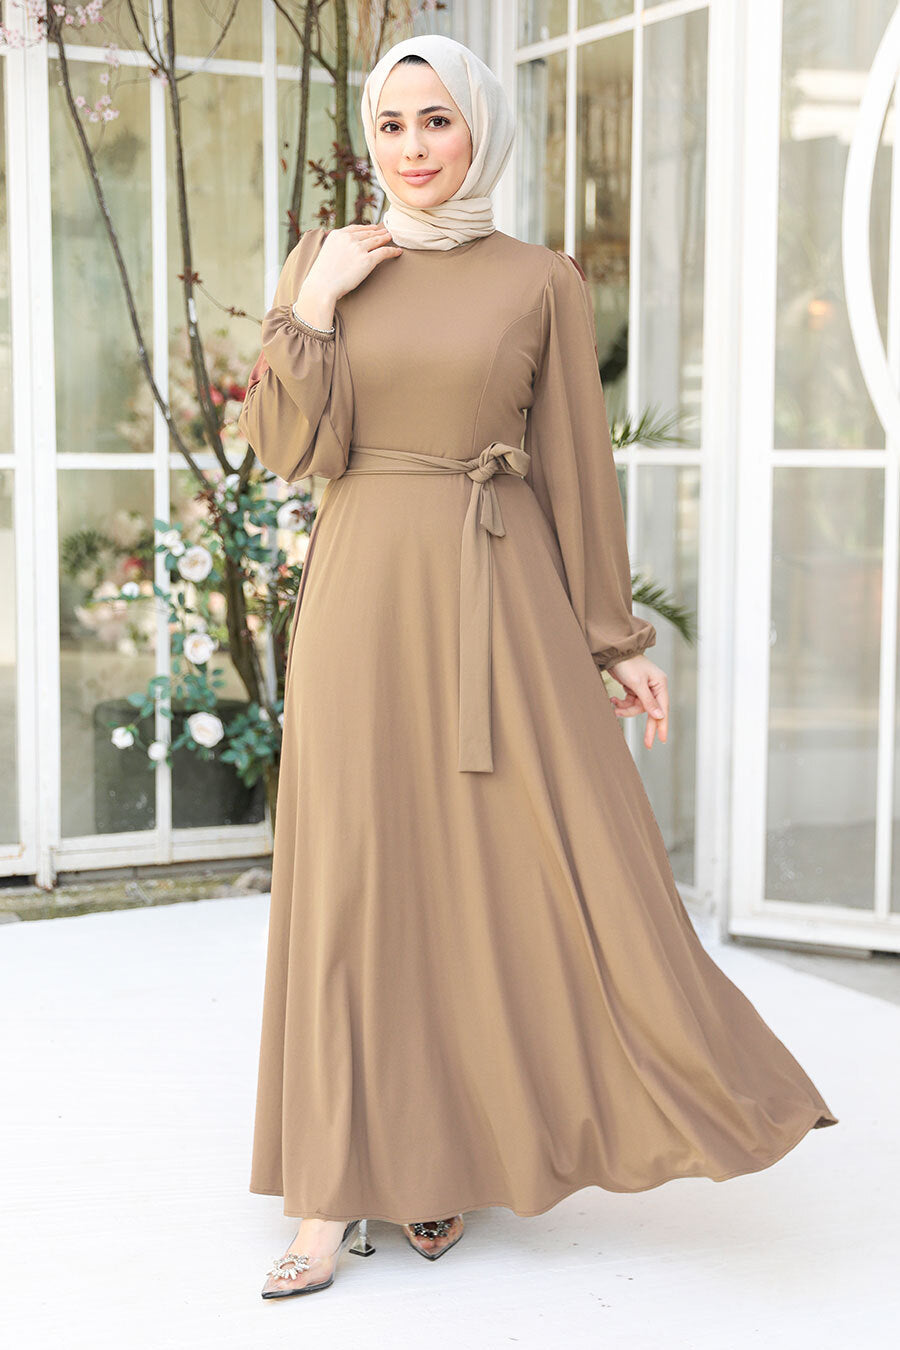 a woman wearing a brown dress and a hijab